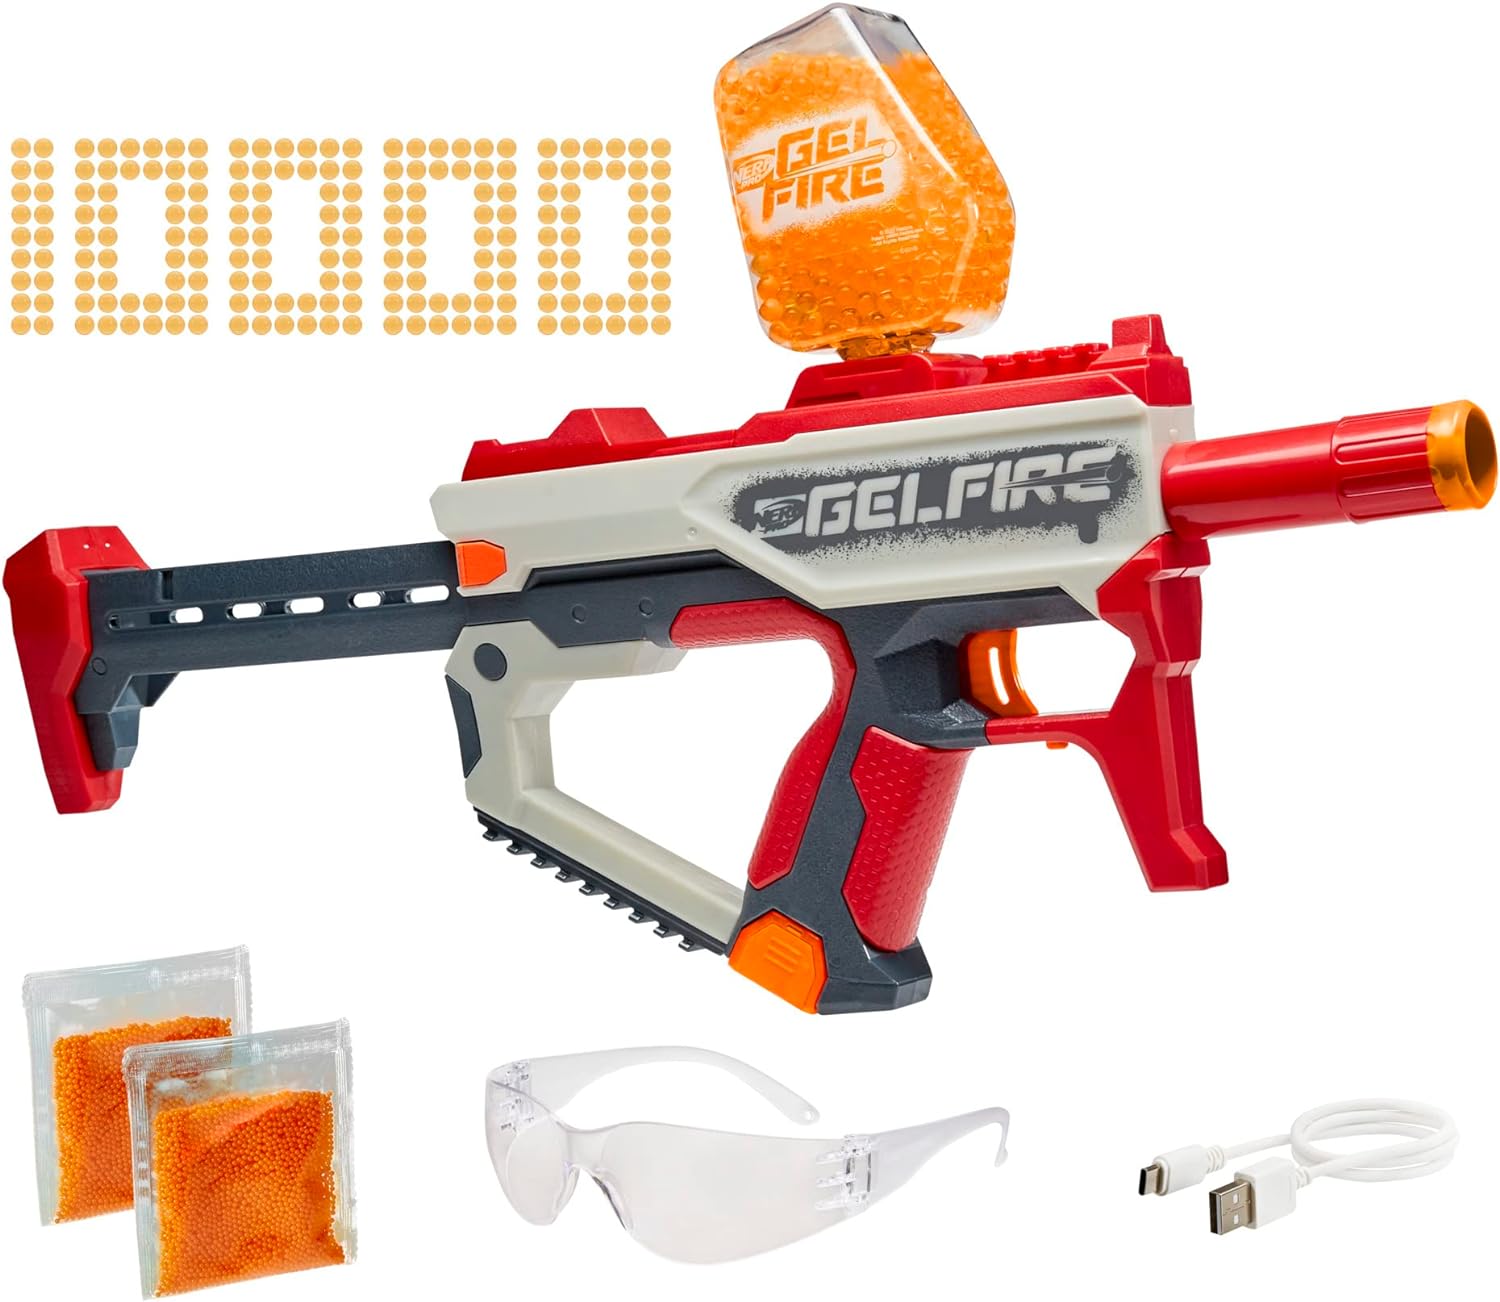 I was a Nerf kid. Had a ton of them. As an adult the first thing that had caught my eye was Rival, and I have a couple of them. They are a ton of fun. Somehow or other, years later, I stumble across these gel guns and the Nerf name came up too. While there are others that I have considered buying, the design and lower FPS of this blaster appeal more to me and the potential use around peoples younger than myself. They do sting a little and soft areas may leave a mark, but not for long, and even t